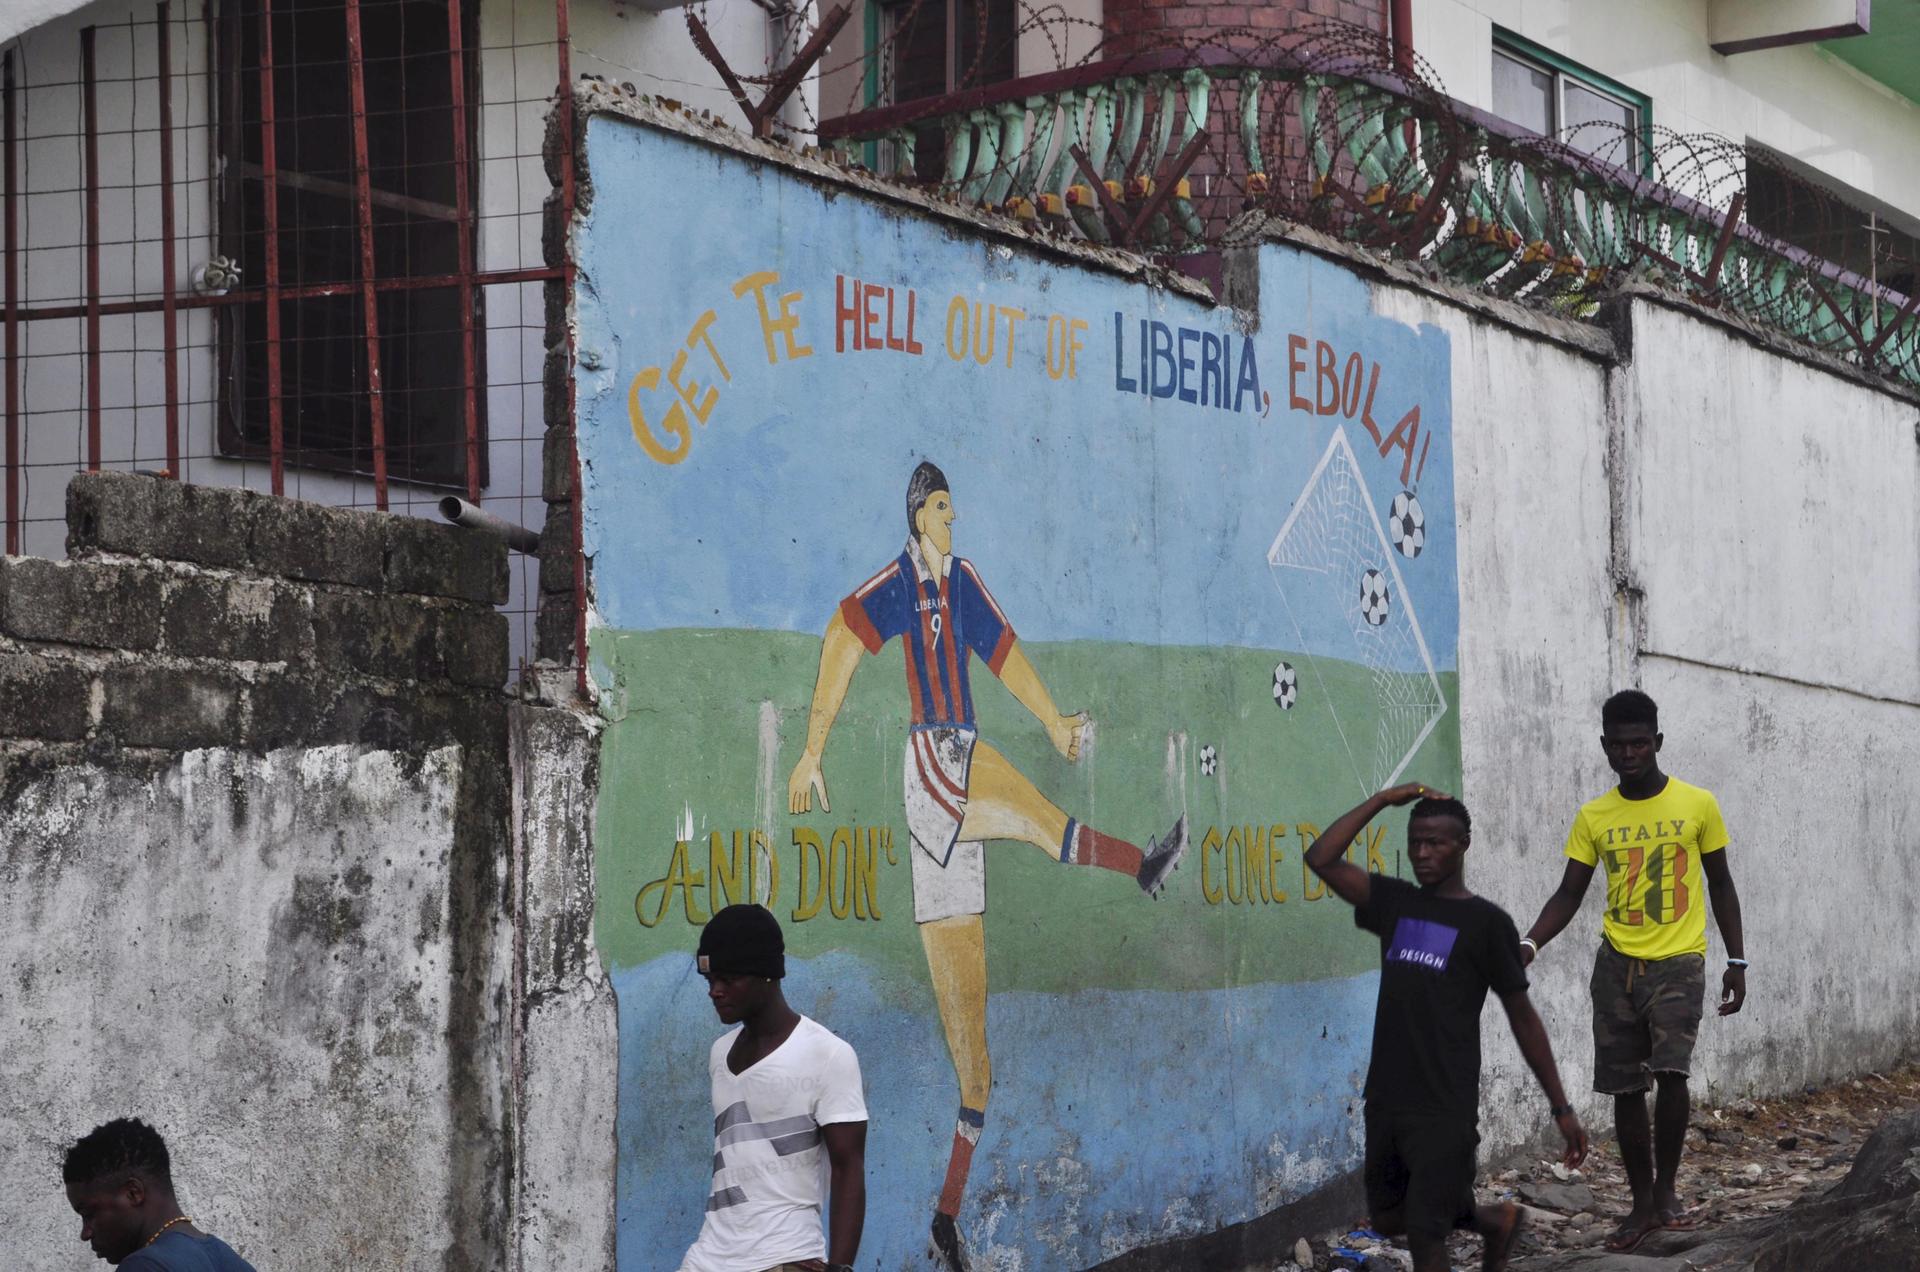 Men walk by a mural that reads "Get the hell of Liberia, Ebola! And don't come back" in Monrovia, Liberia, April 1, 2016.